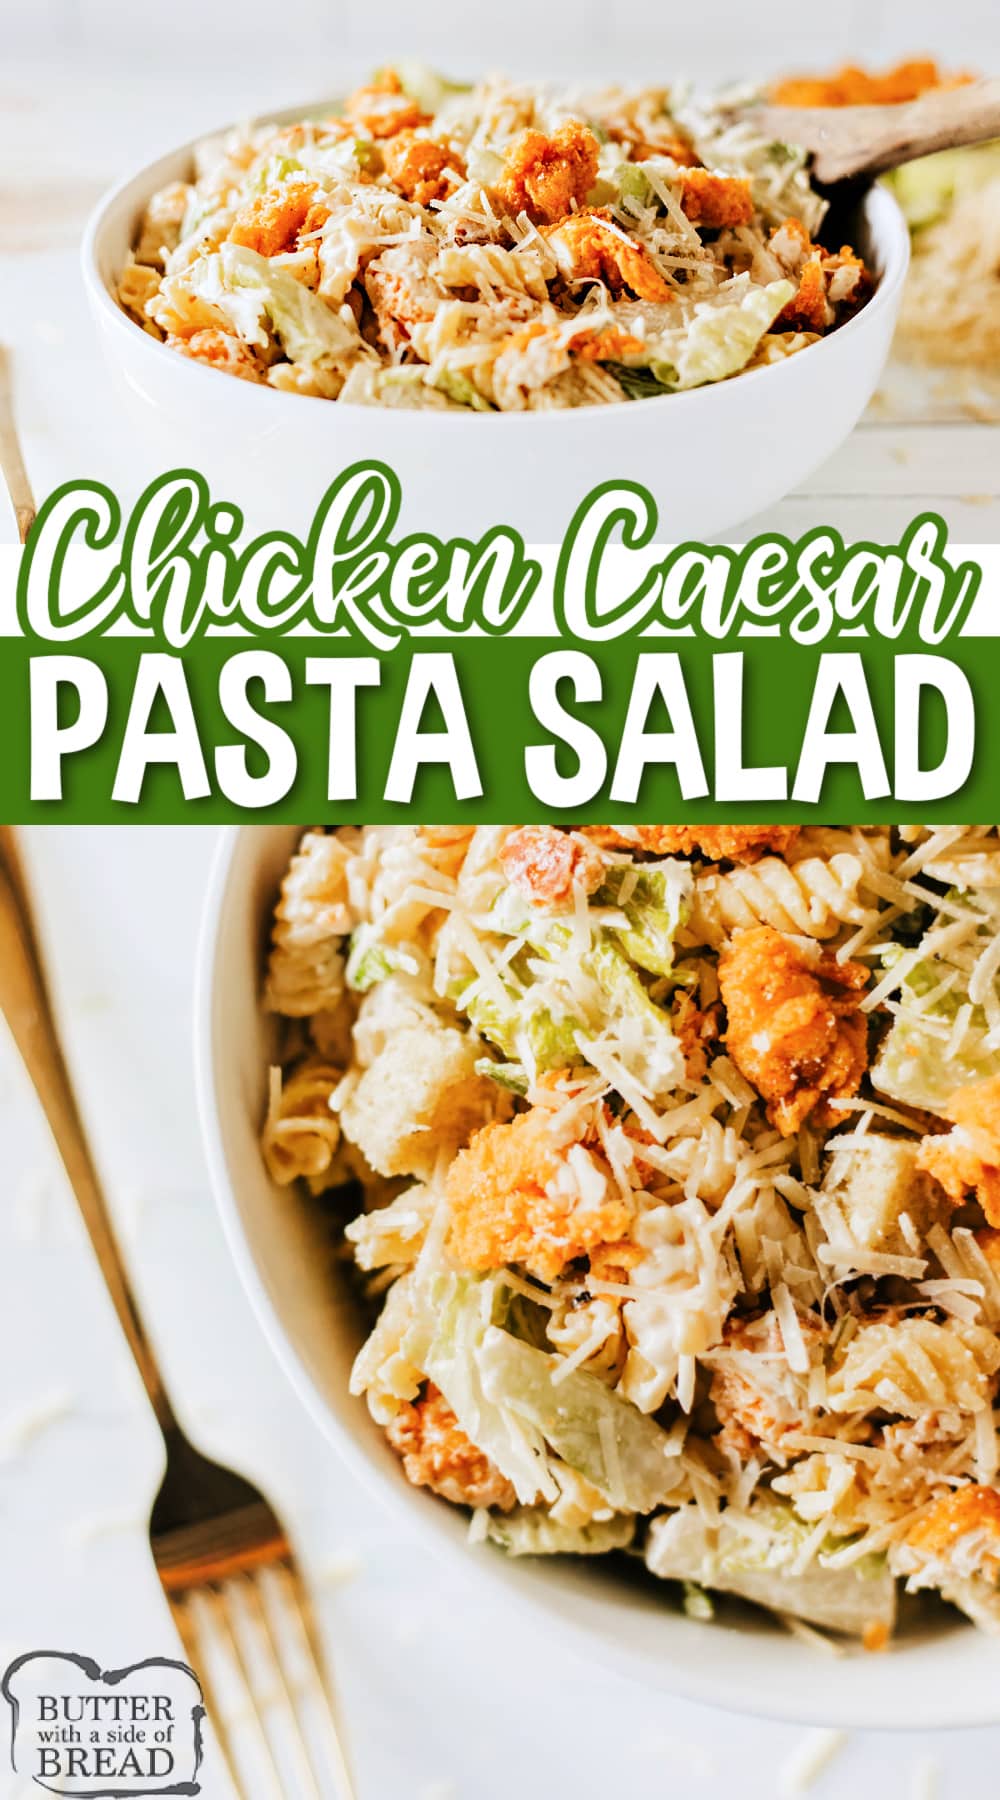 Chicken Caesar Pasta Salad is a great way to turn a salad into a filling main dish! This Caesar salad recipe is made with rotini, crispy chicken tenders, and shredded parmesan.